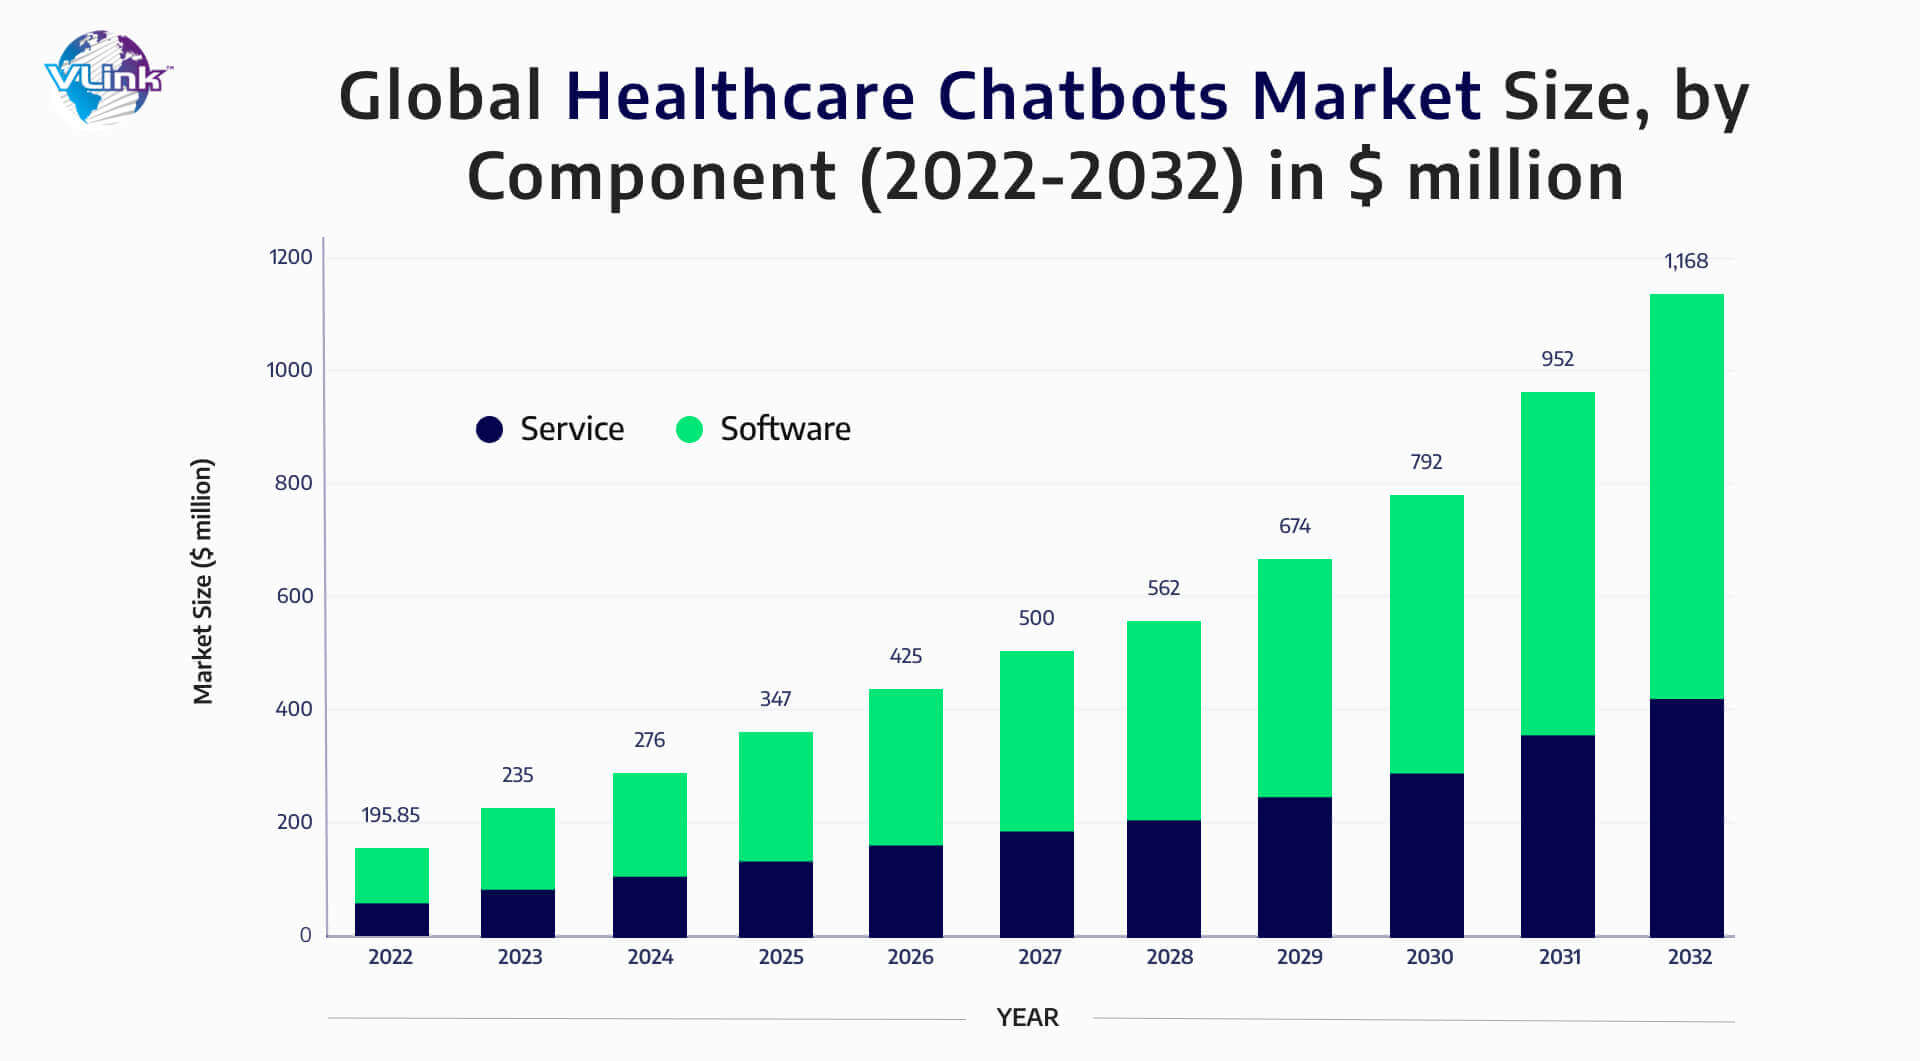 Global Healthcare Chatbots Market Size, by Component in Million